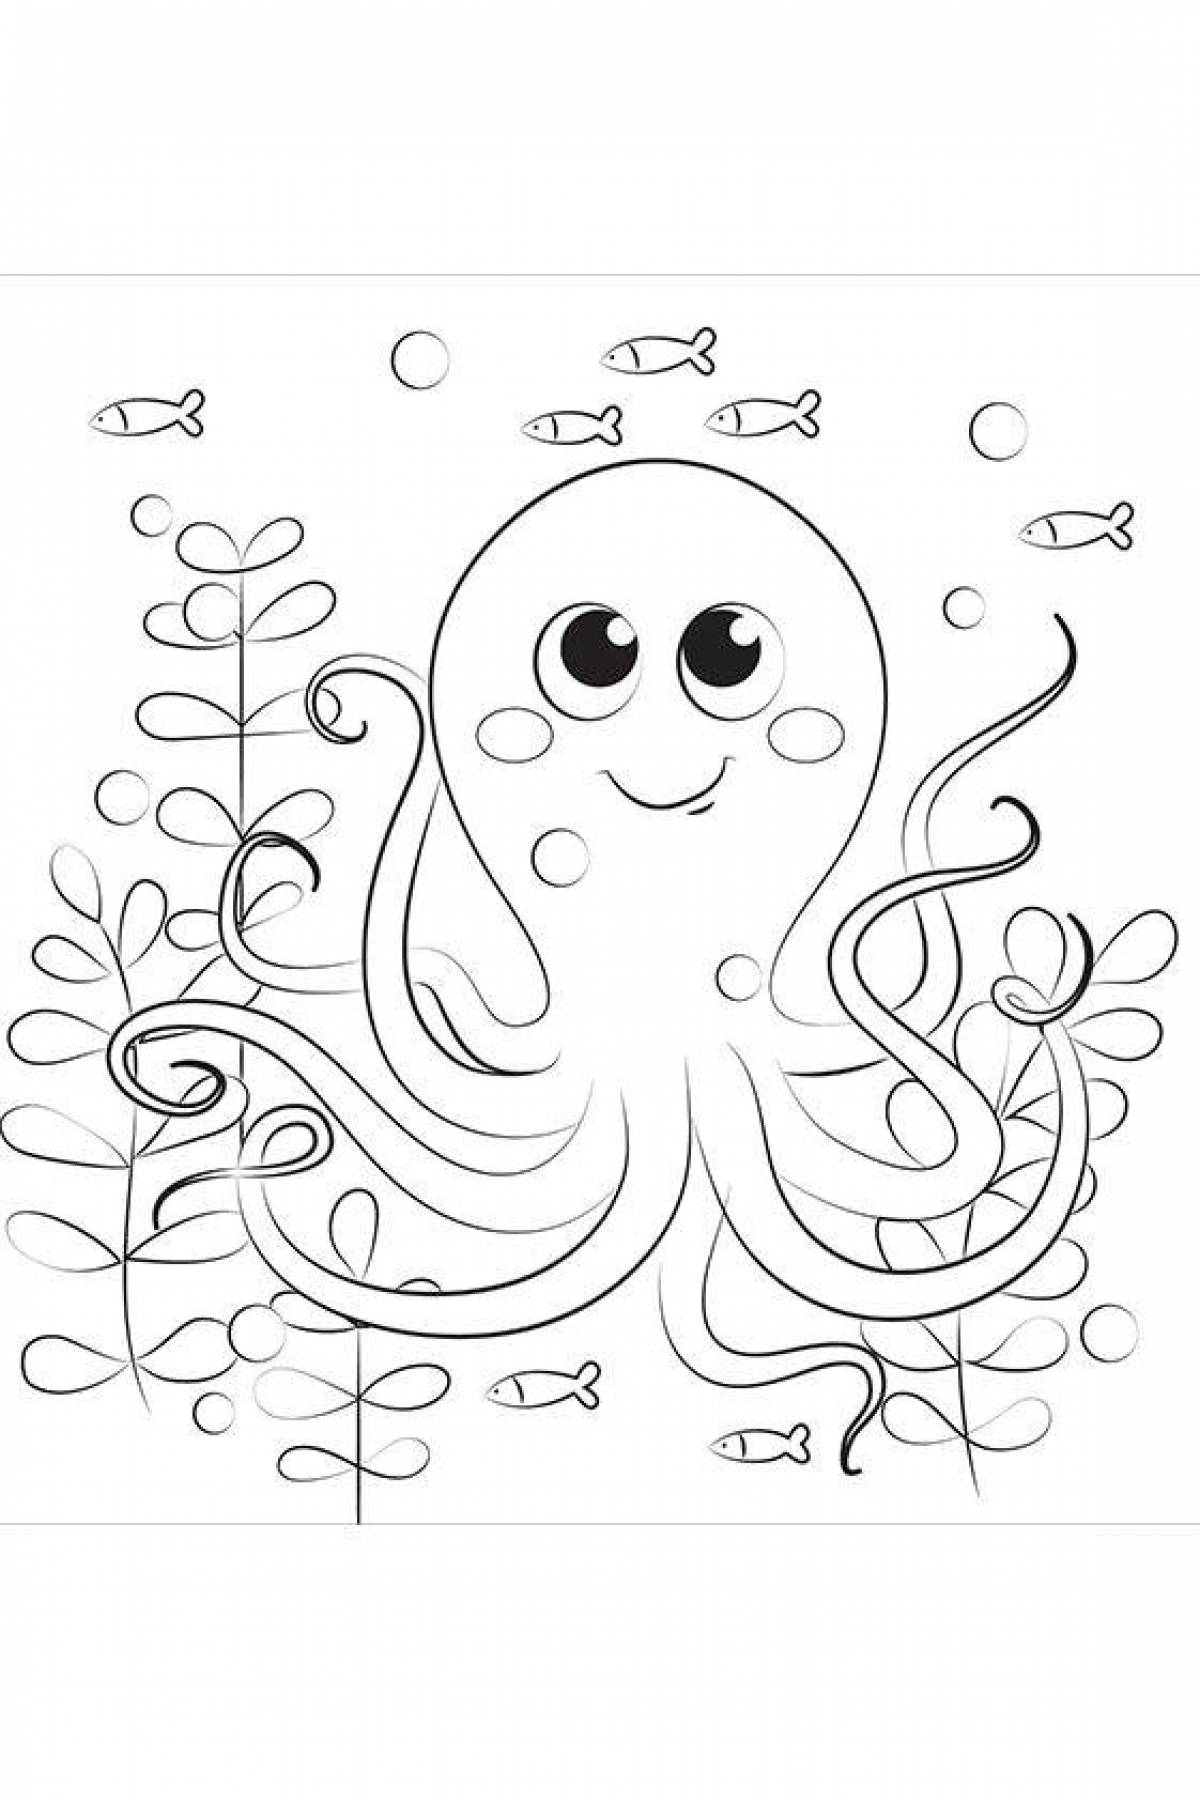 Playful octopus coloring page for kids